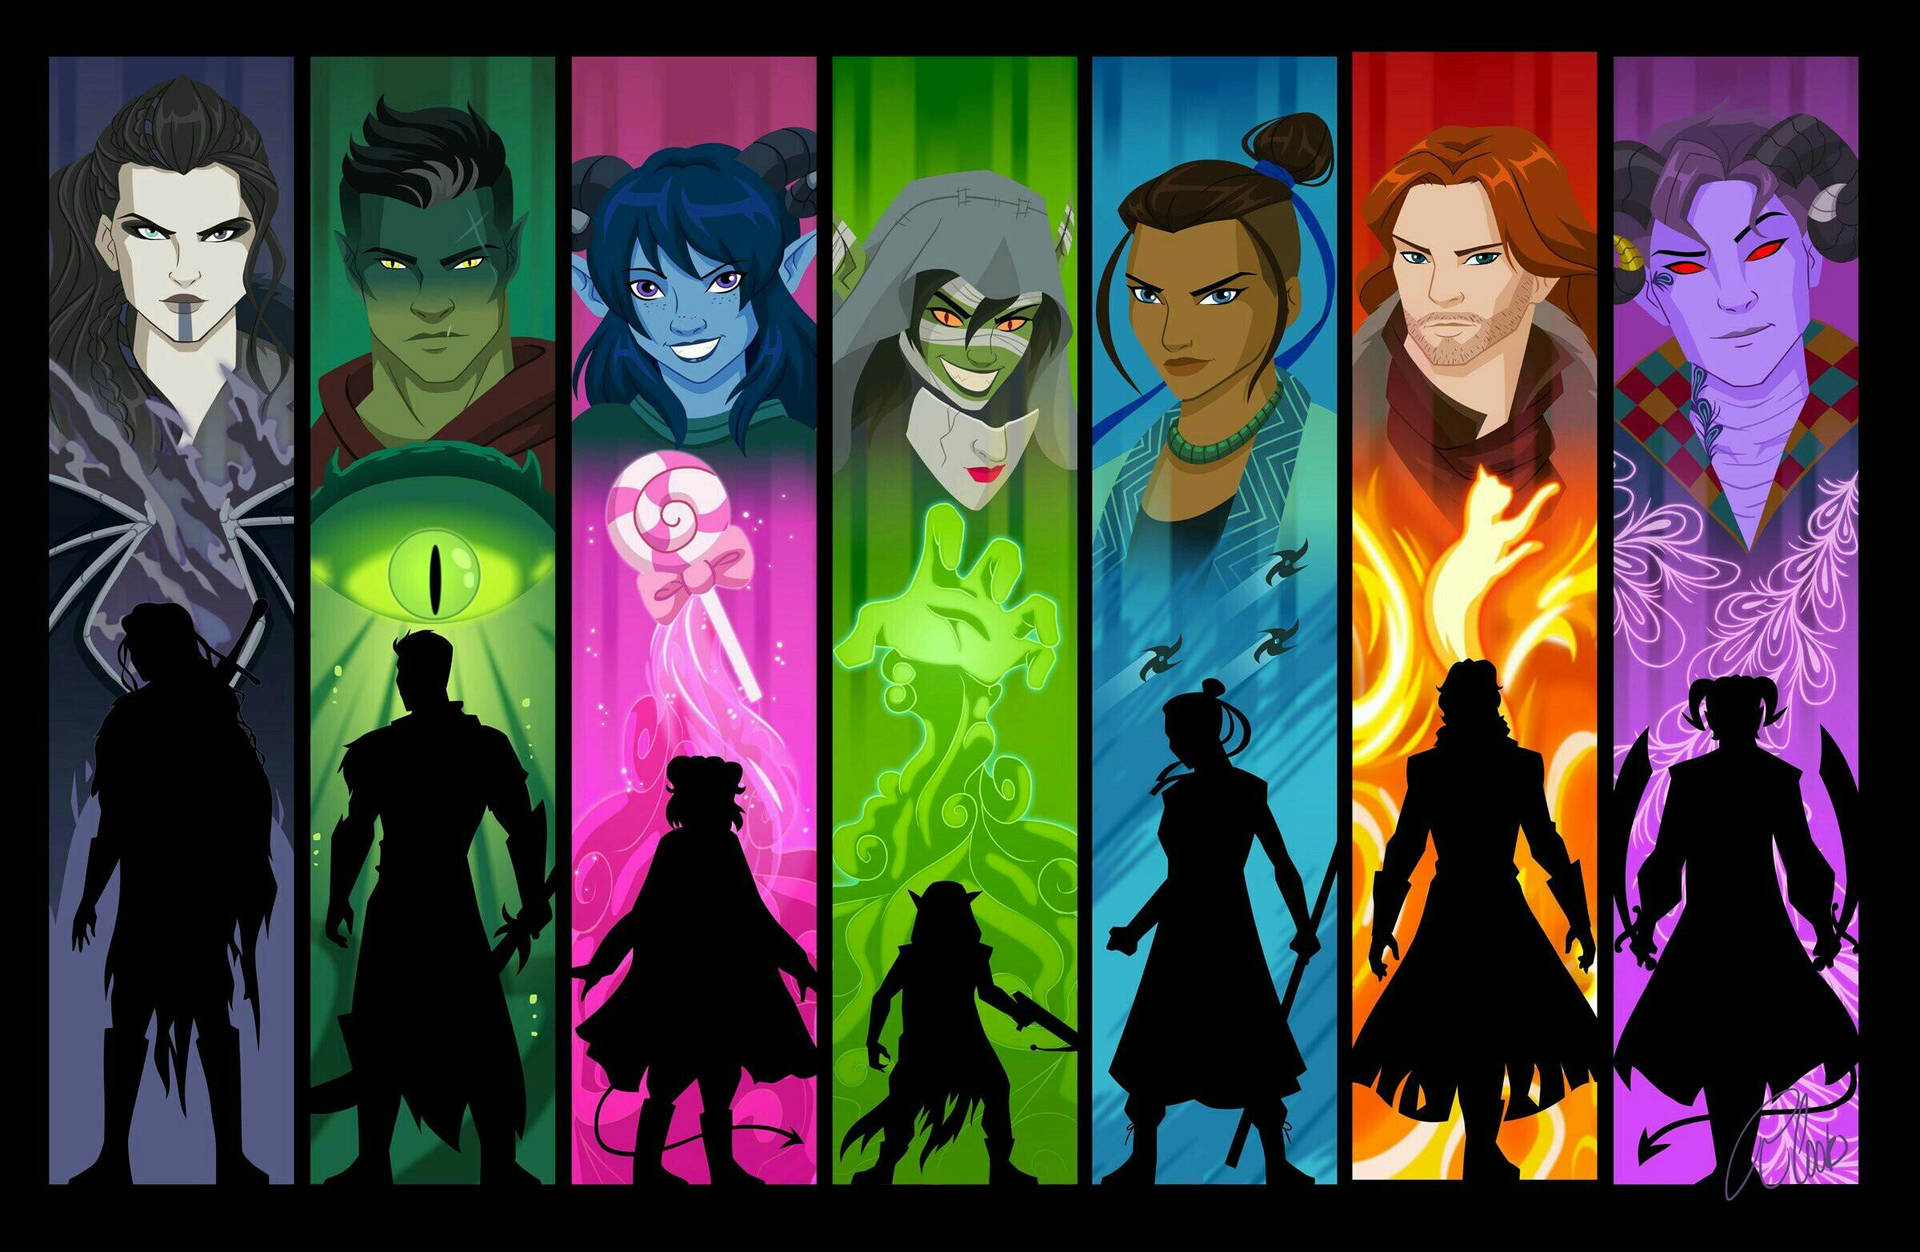 The Mighty Nein, a ragtag group of adventurers from Critical Role Wallpaper